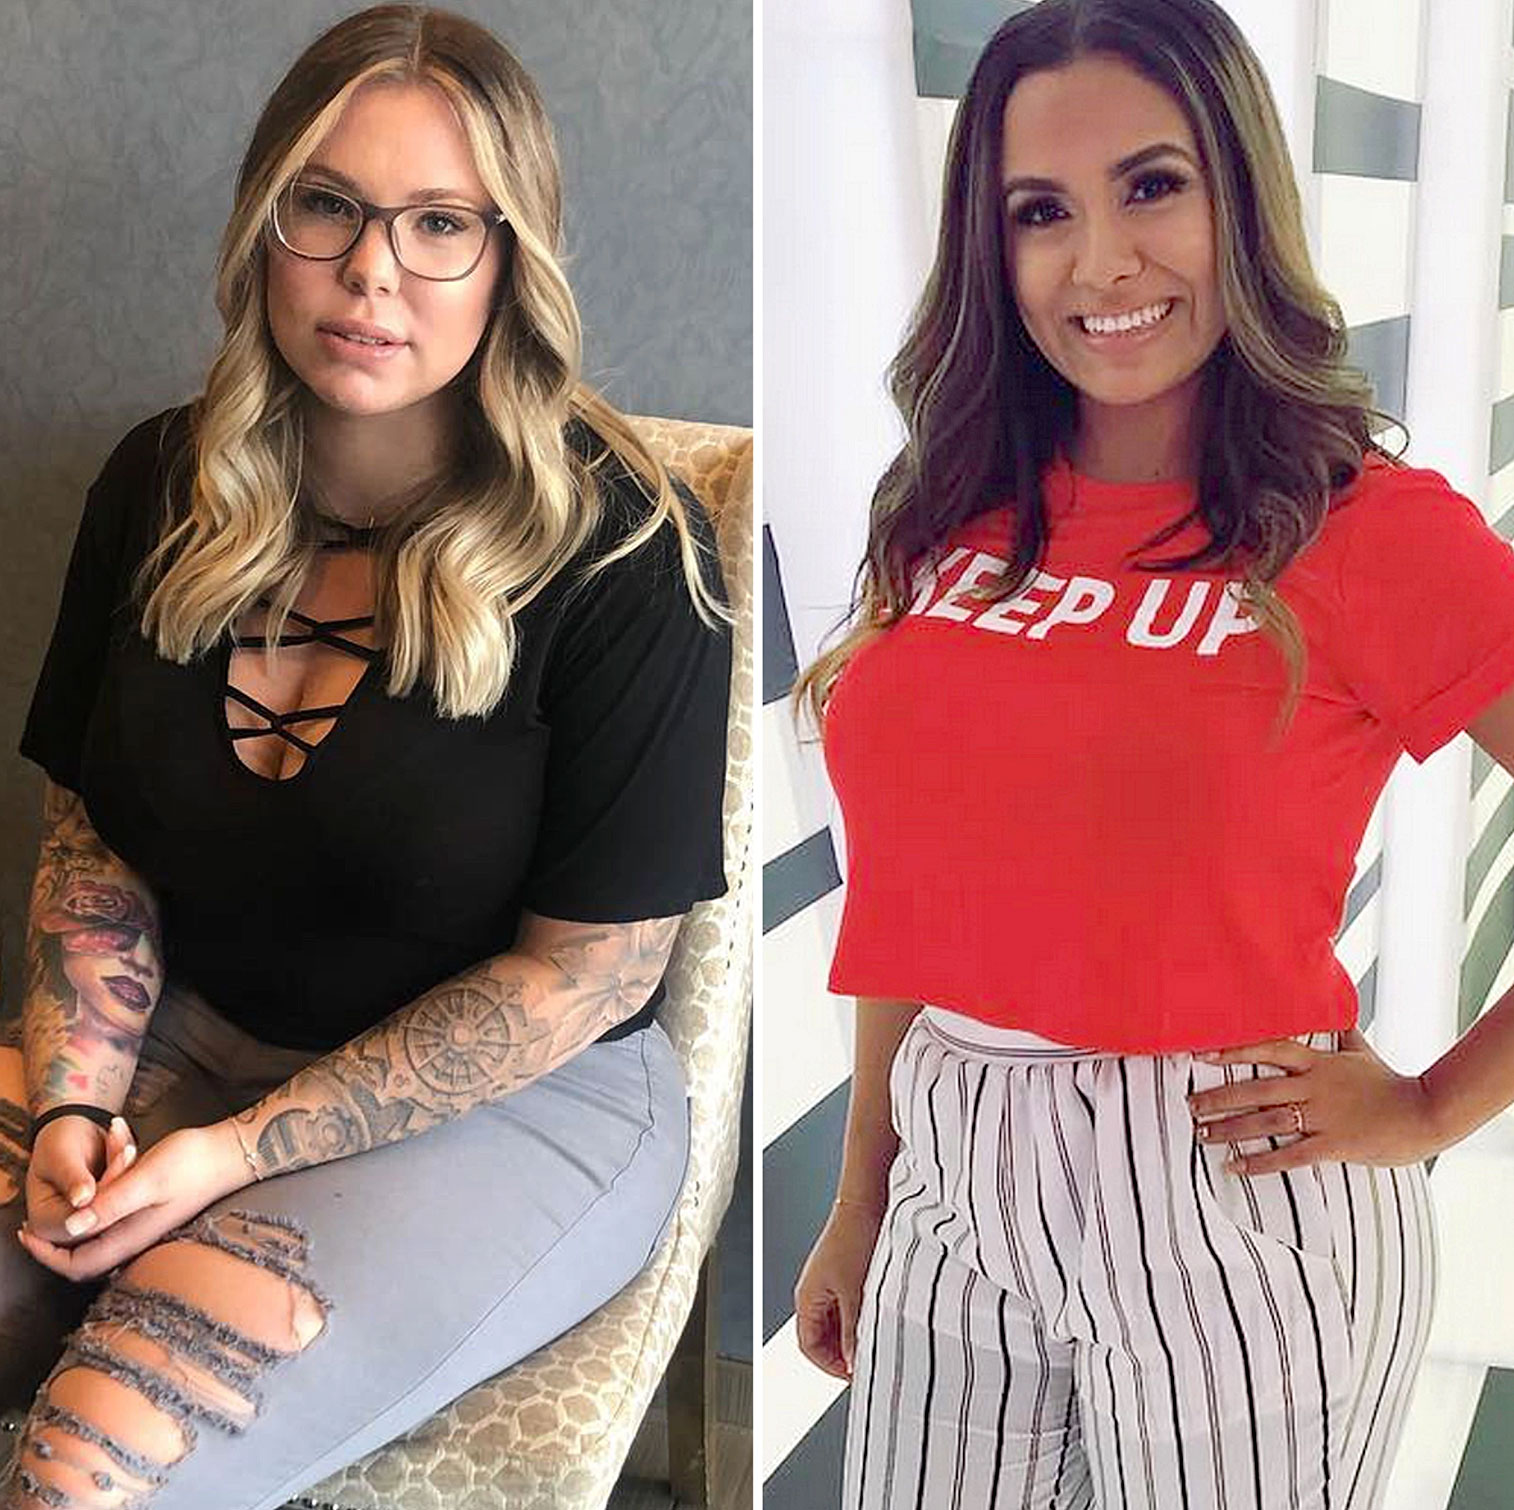 Teen Mom 2's Kailyn Lowry and Briana DeJesus' Feud: All the Drama